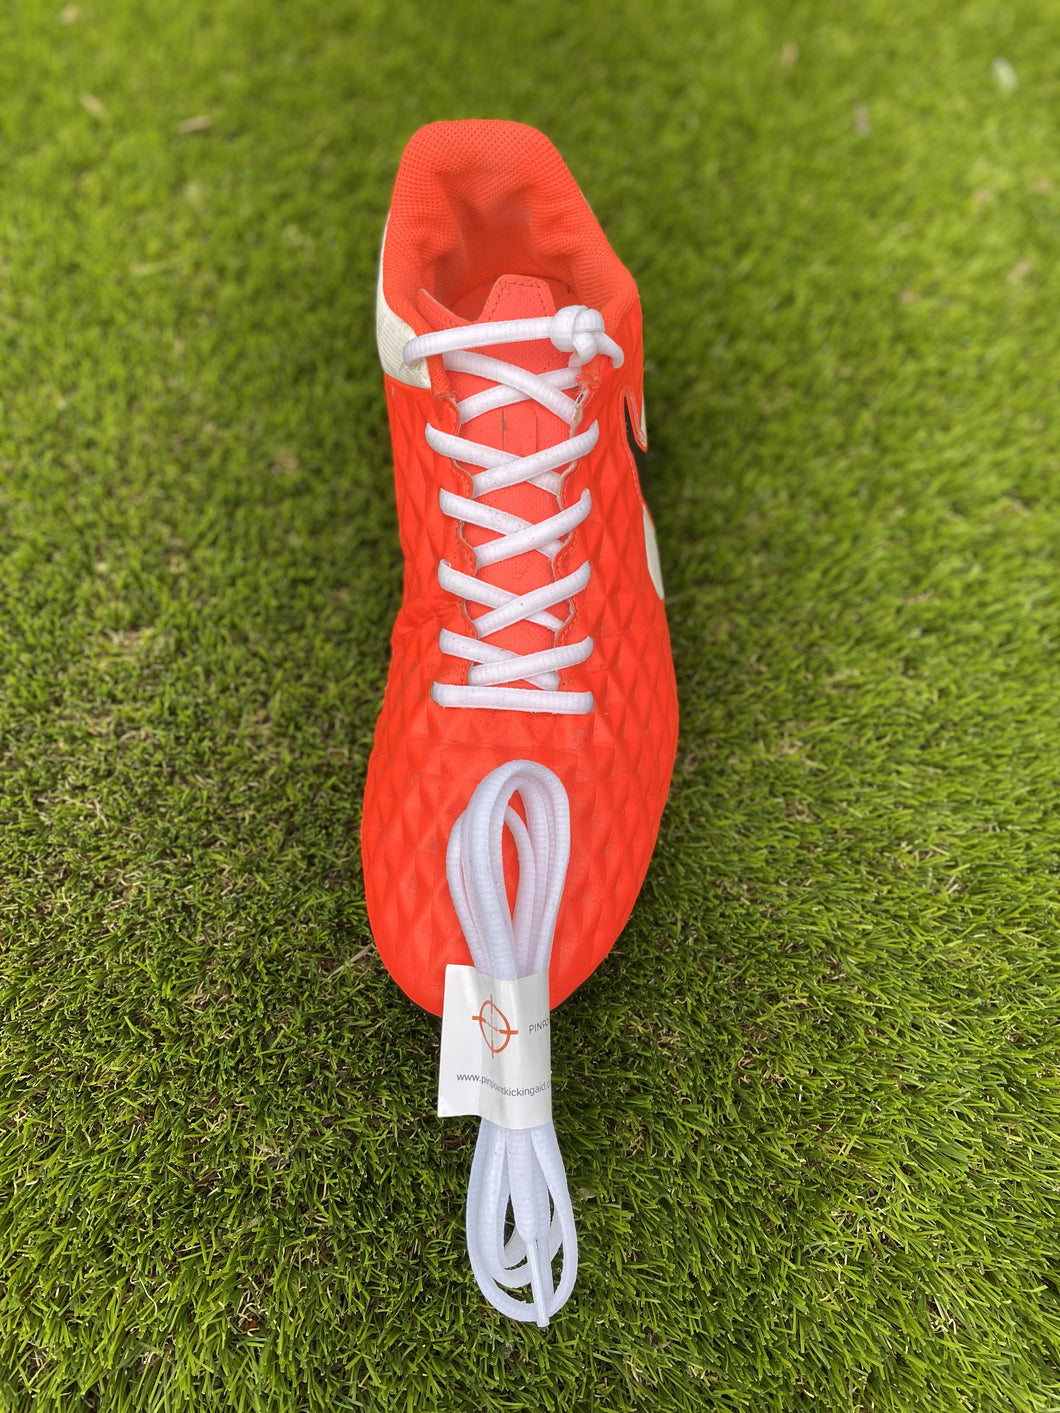 AFL Pinpoint Kicking Laces - Pair (2)